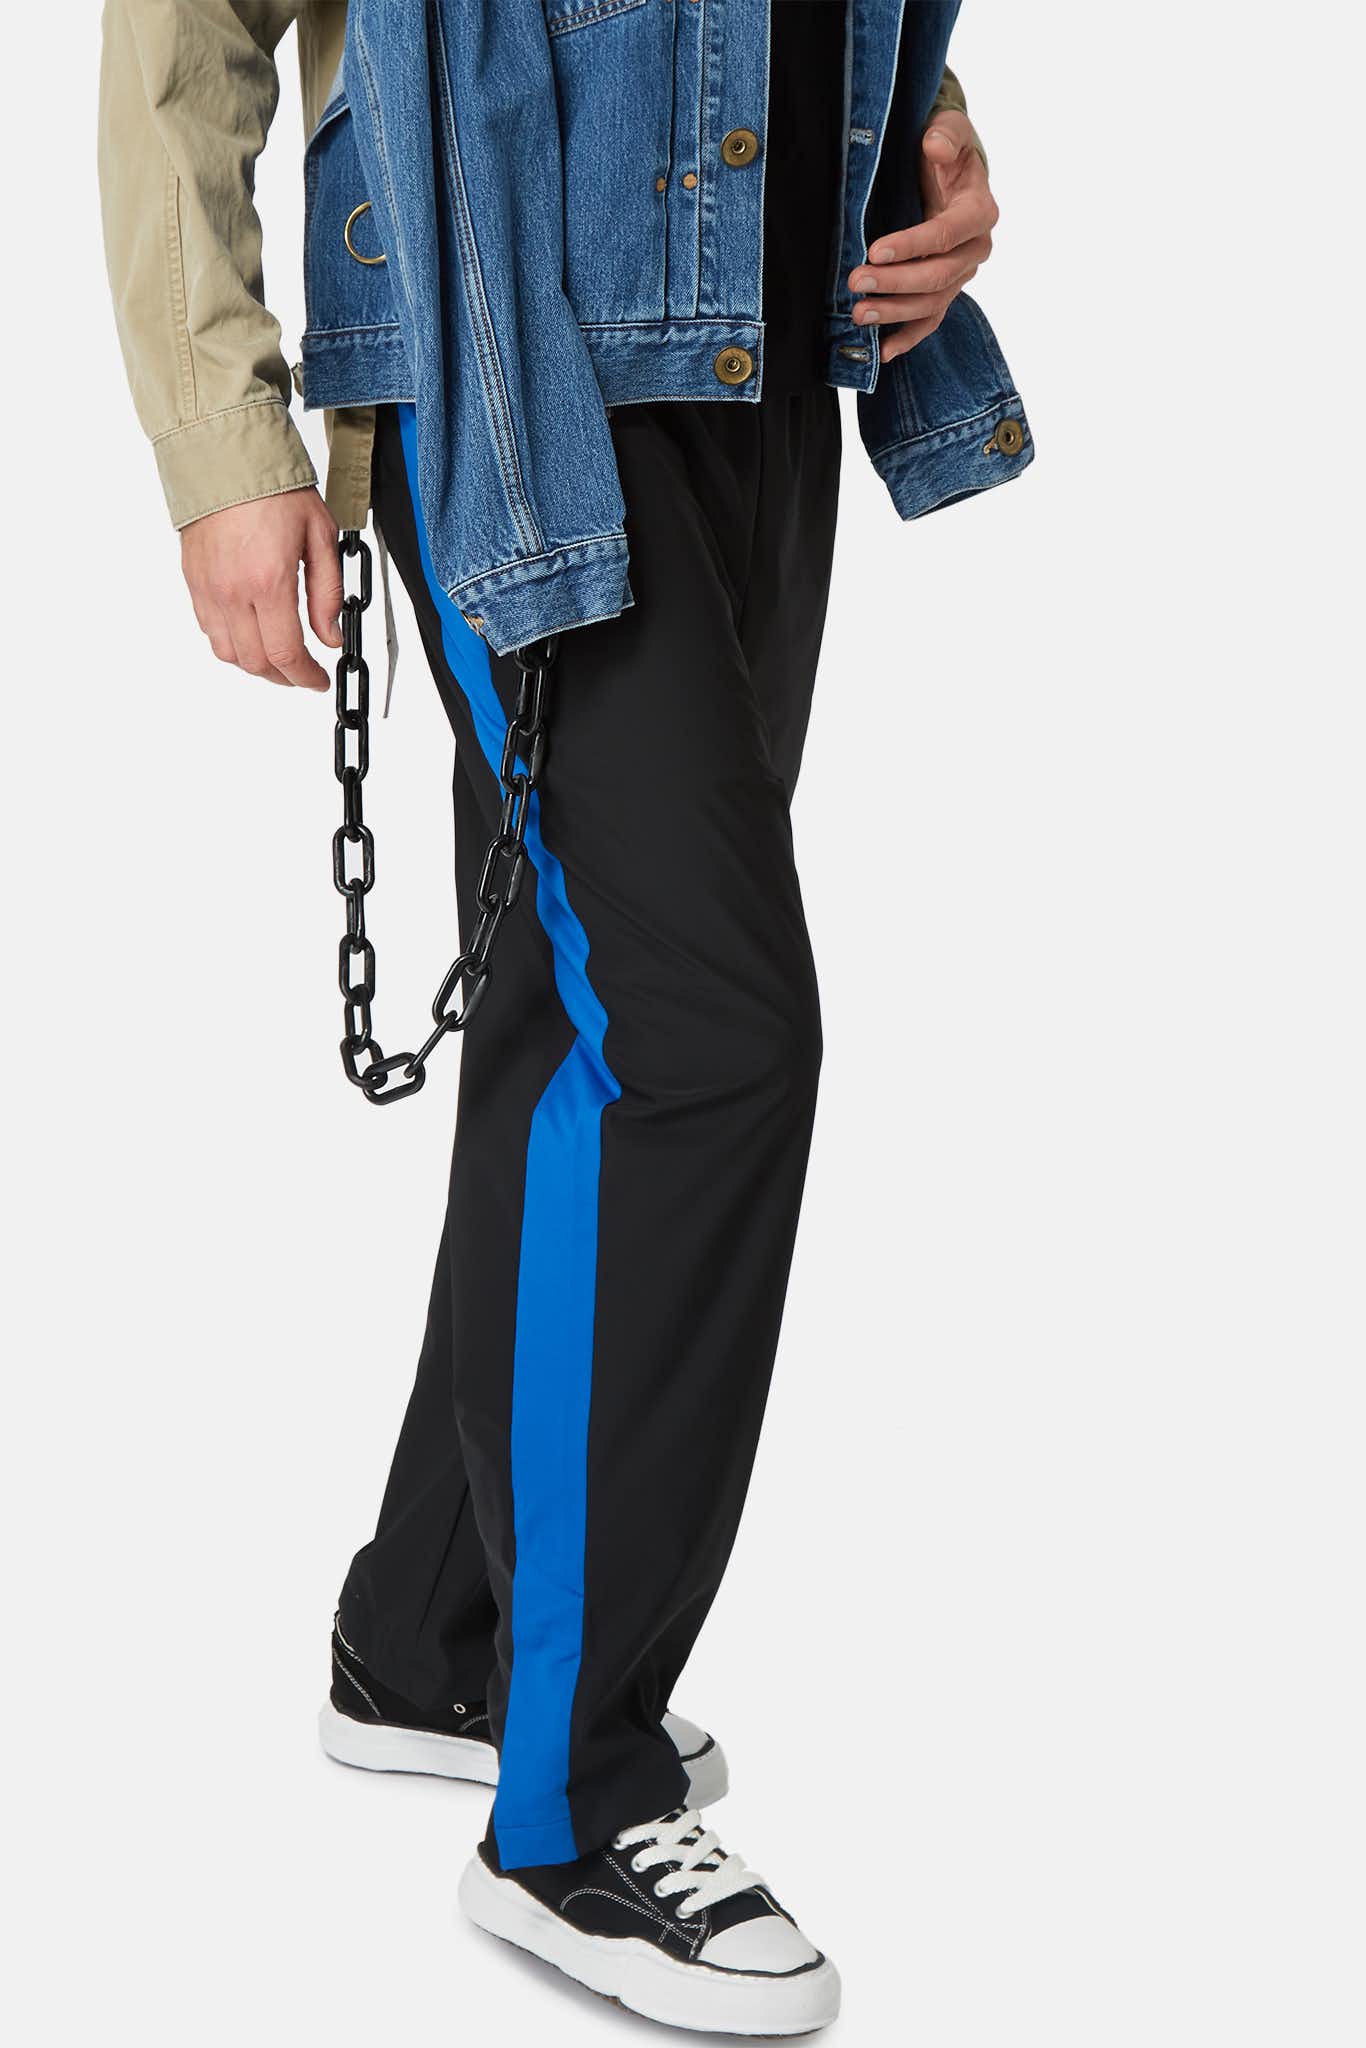 off white belt on person